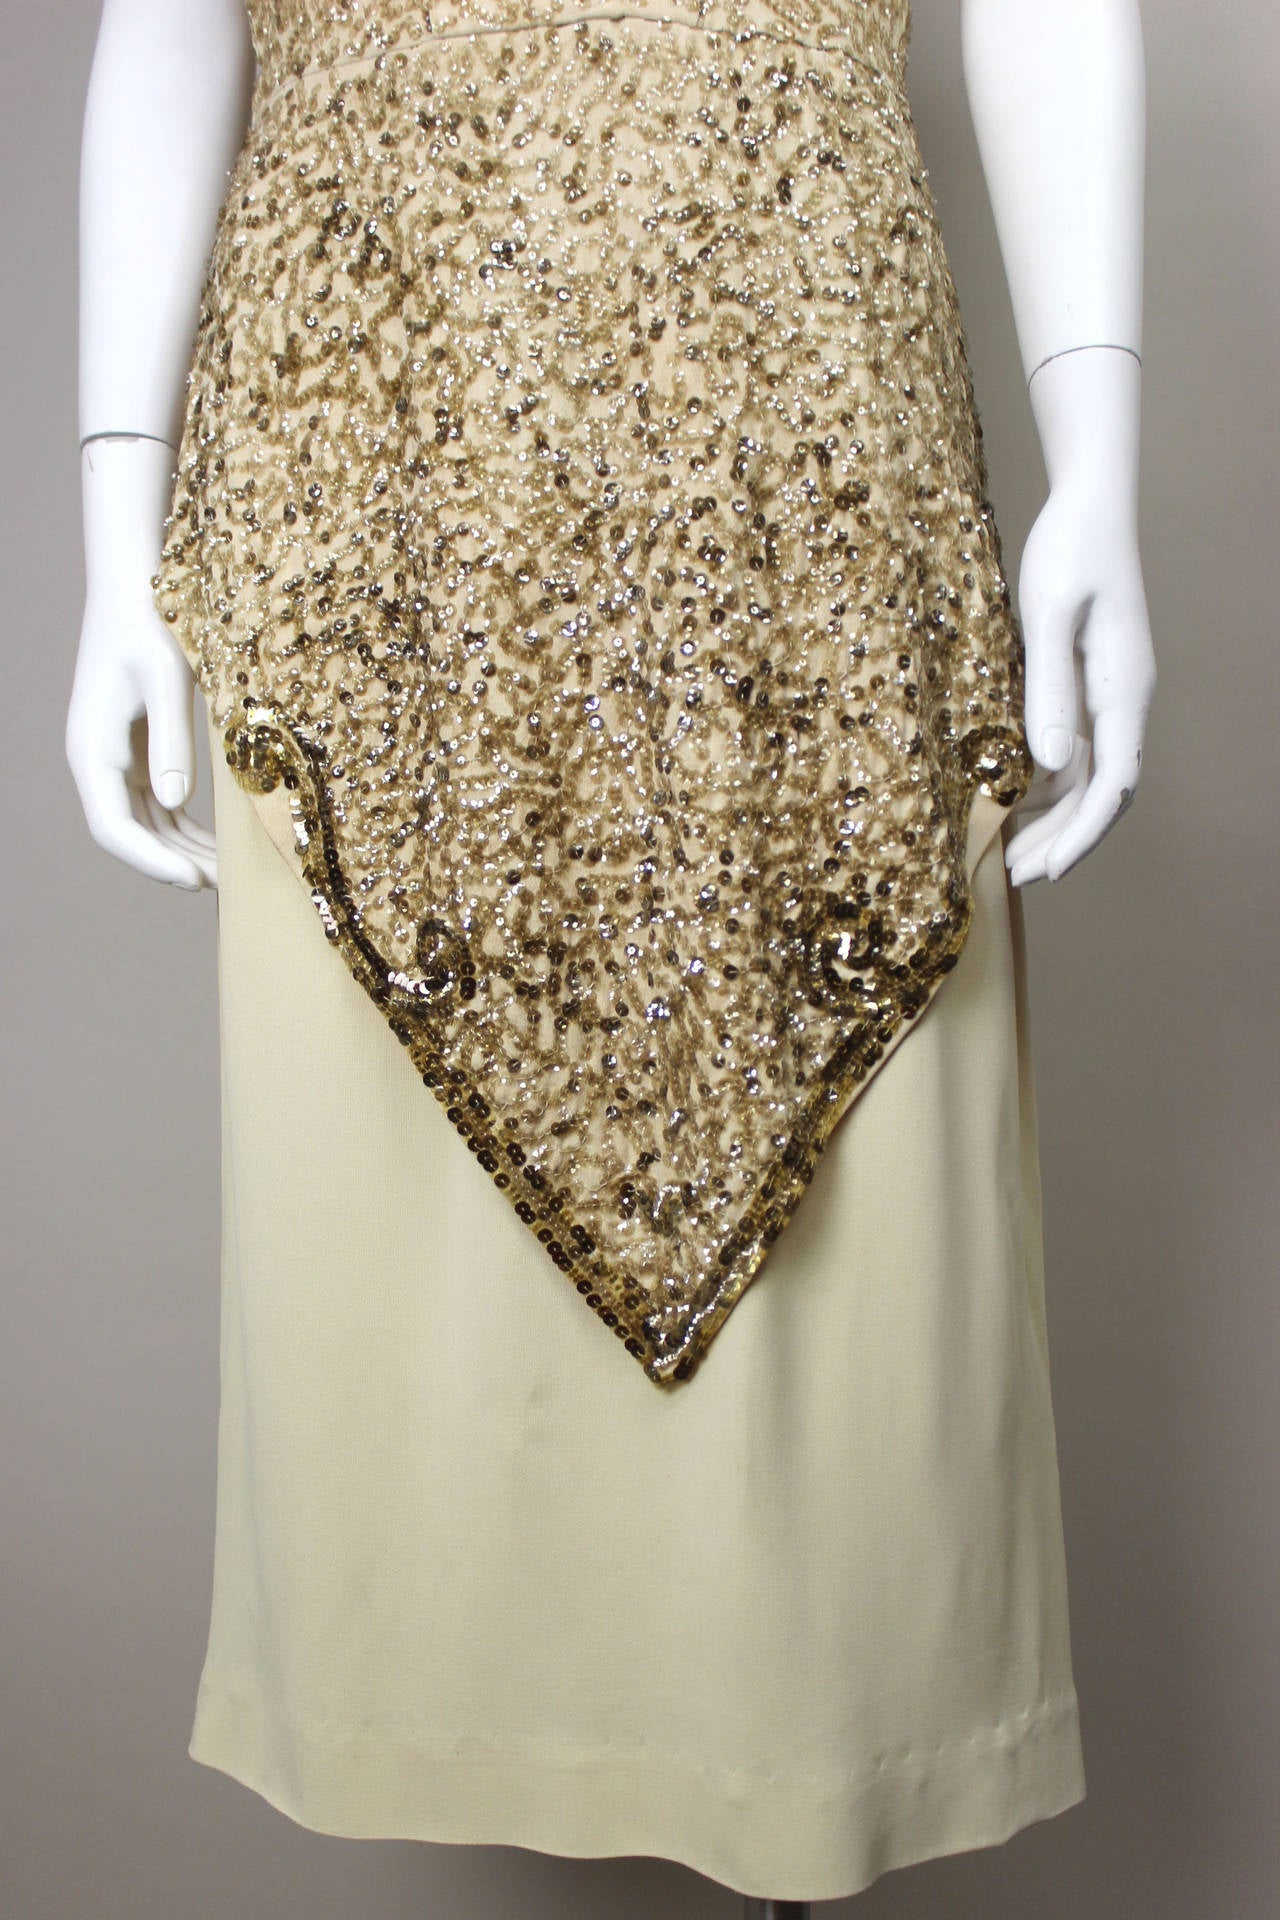 Exquisite 1940s Sequined Cocktail Dress In Excellent Condition For Sale In New York, NY